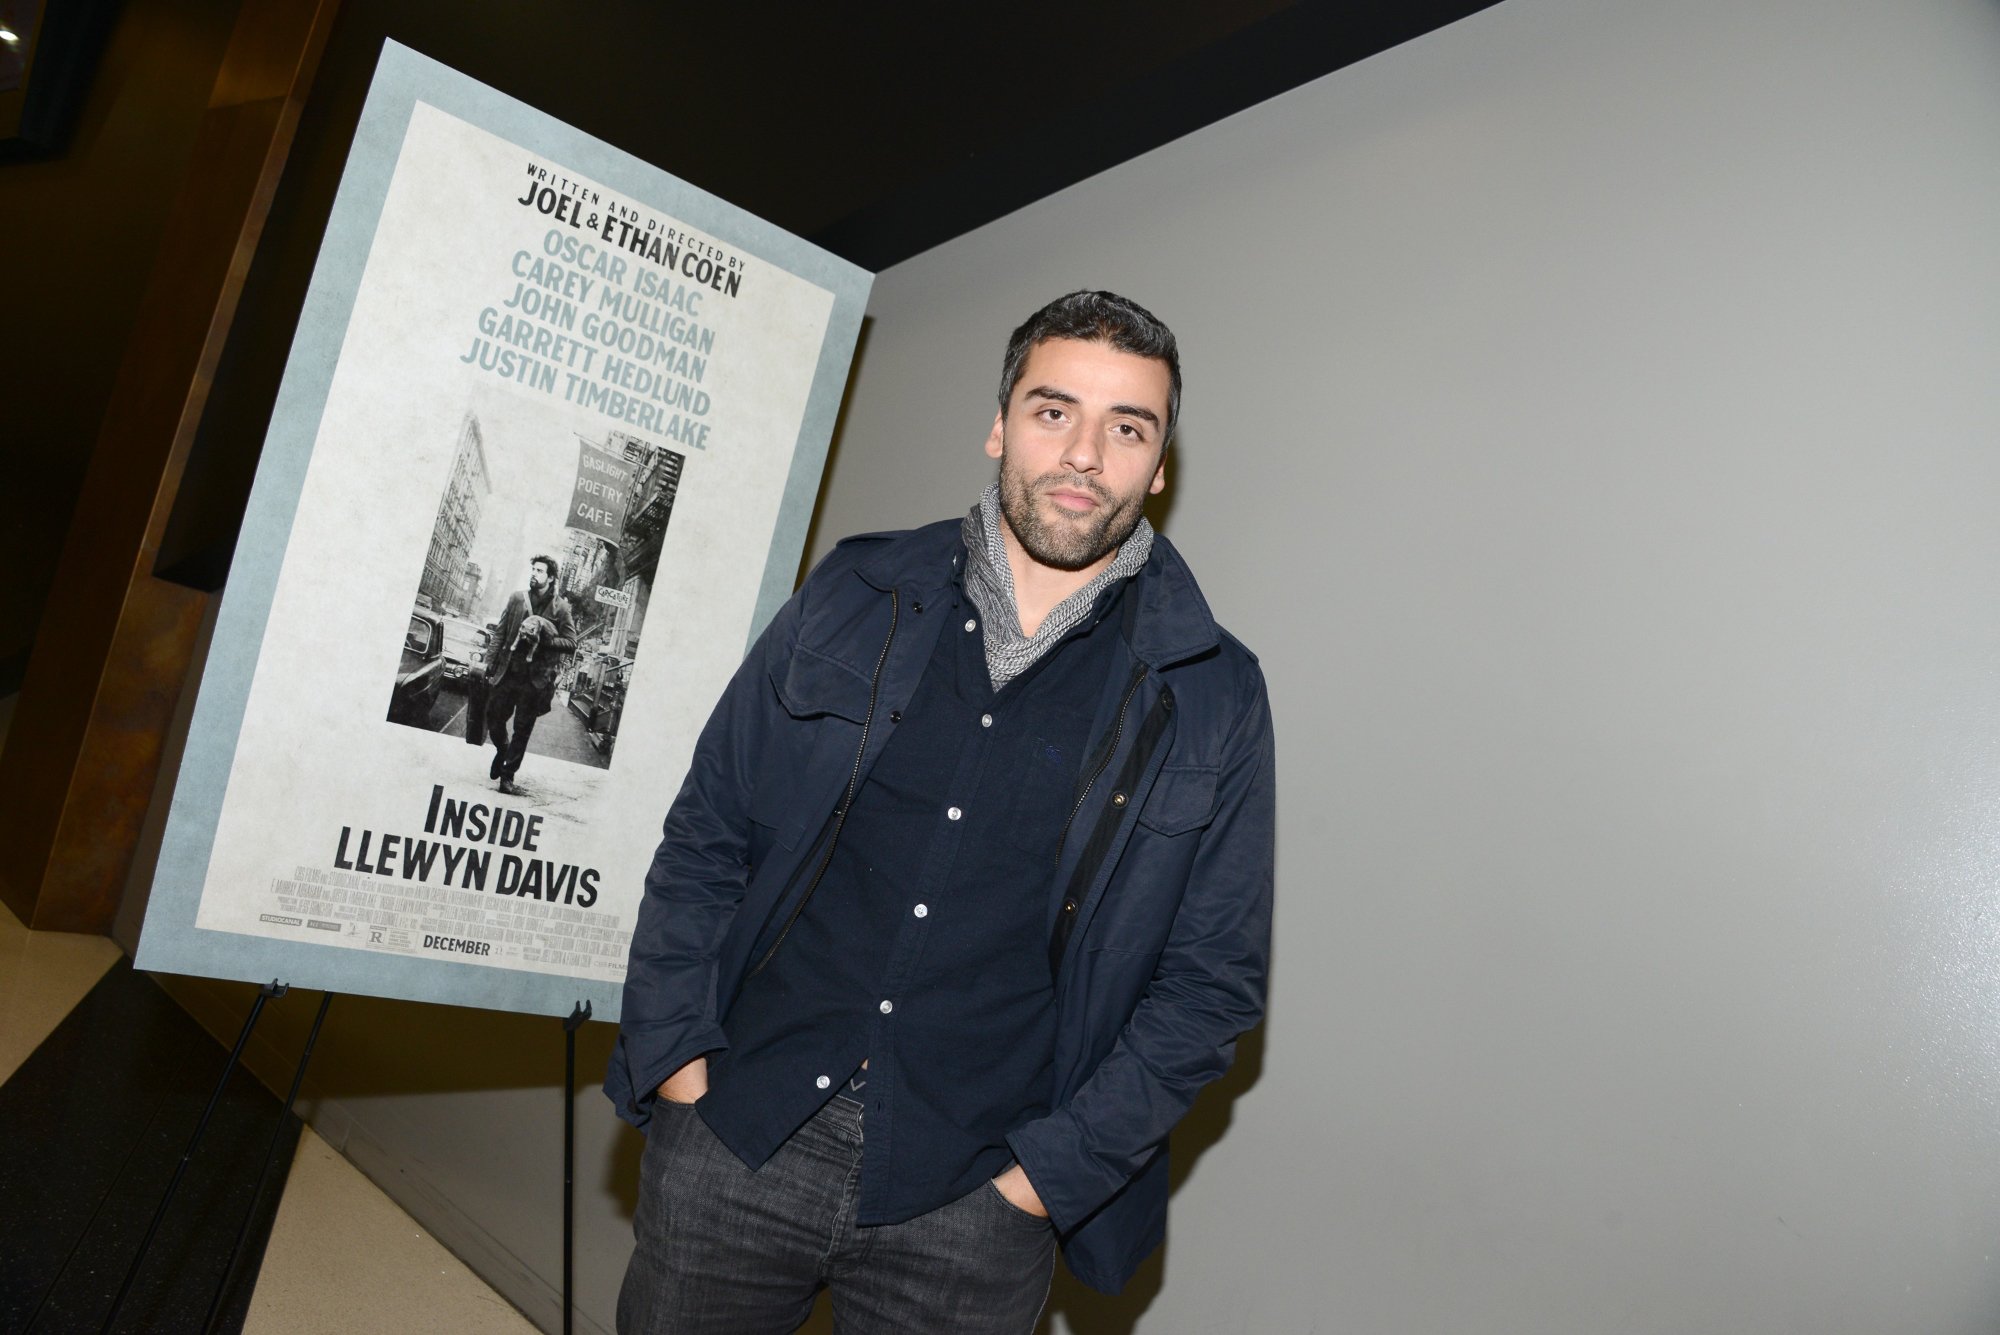 'Inside Llewyn Davis' Oscar Isaac standing in front of movie poster with his hands in his pockets